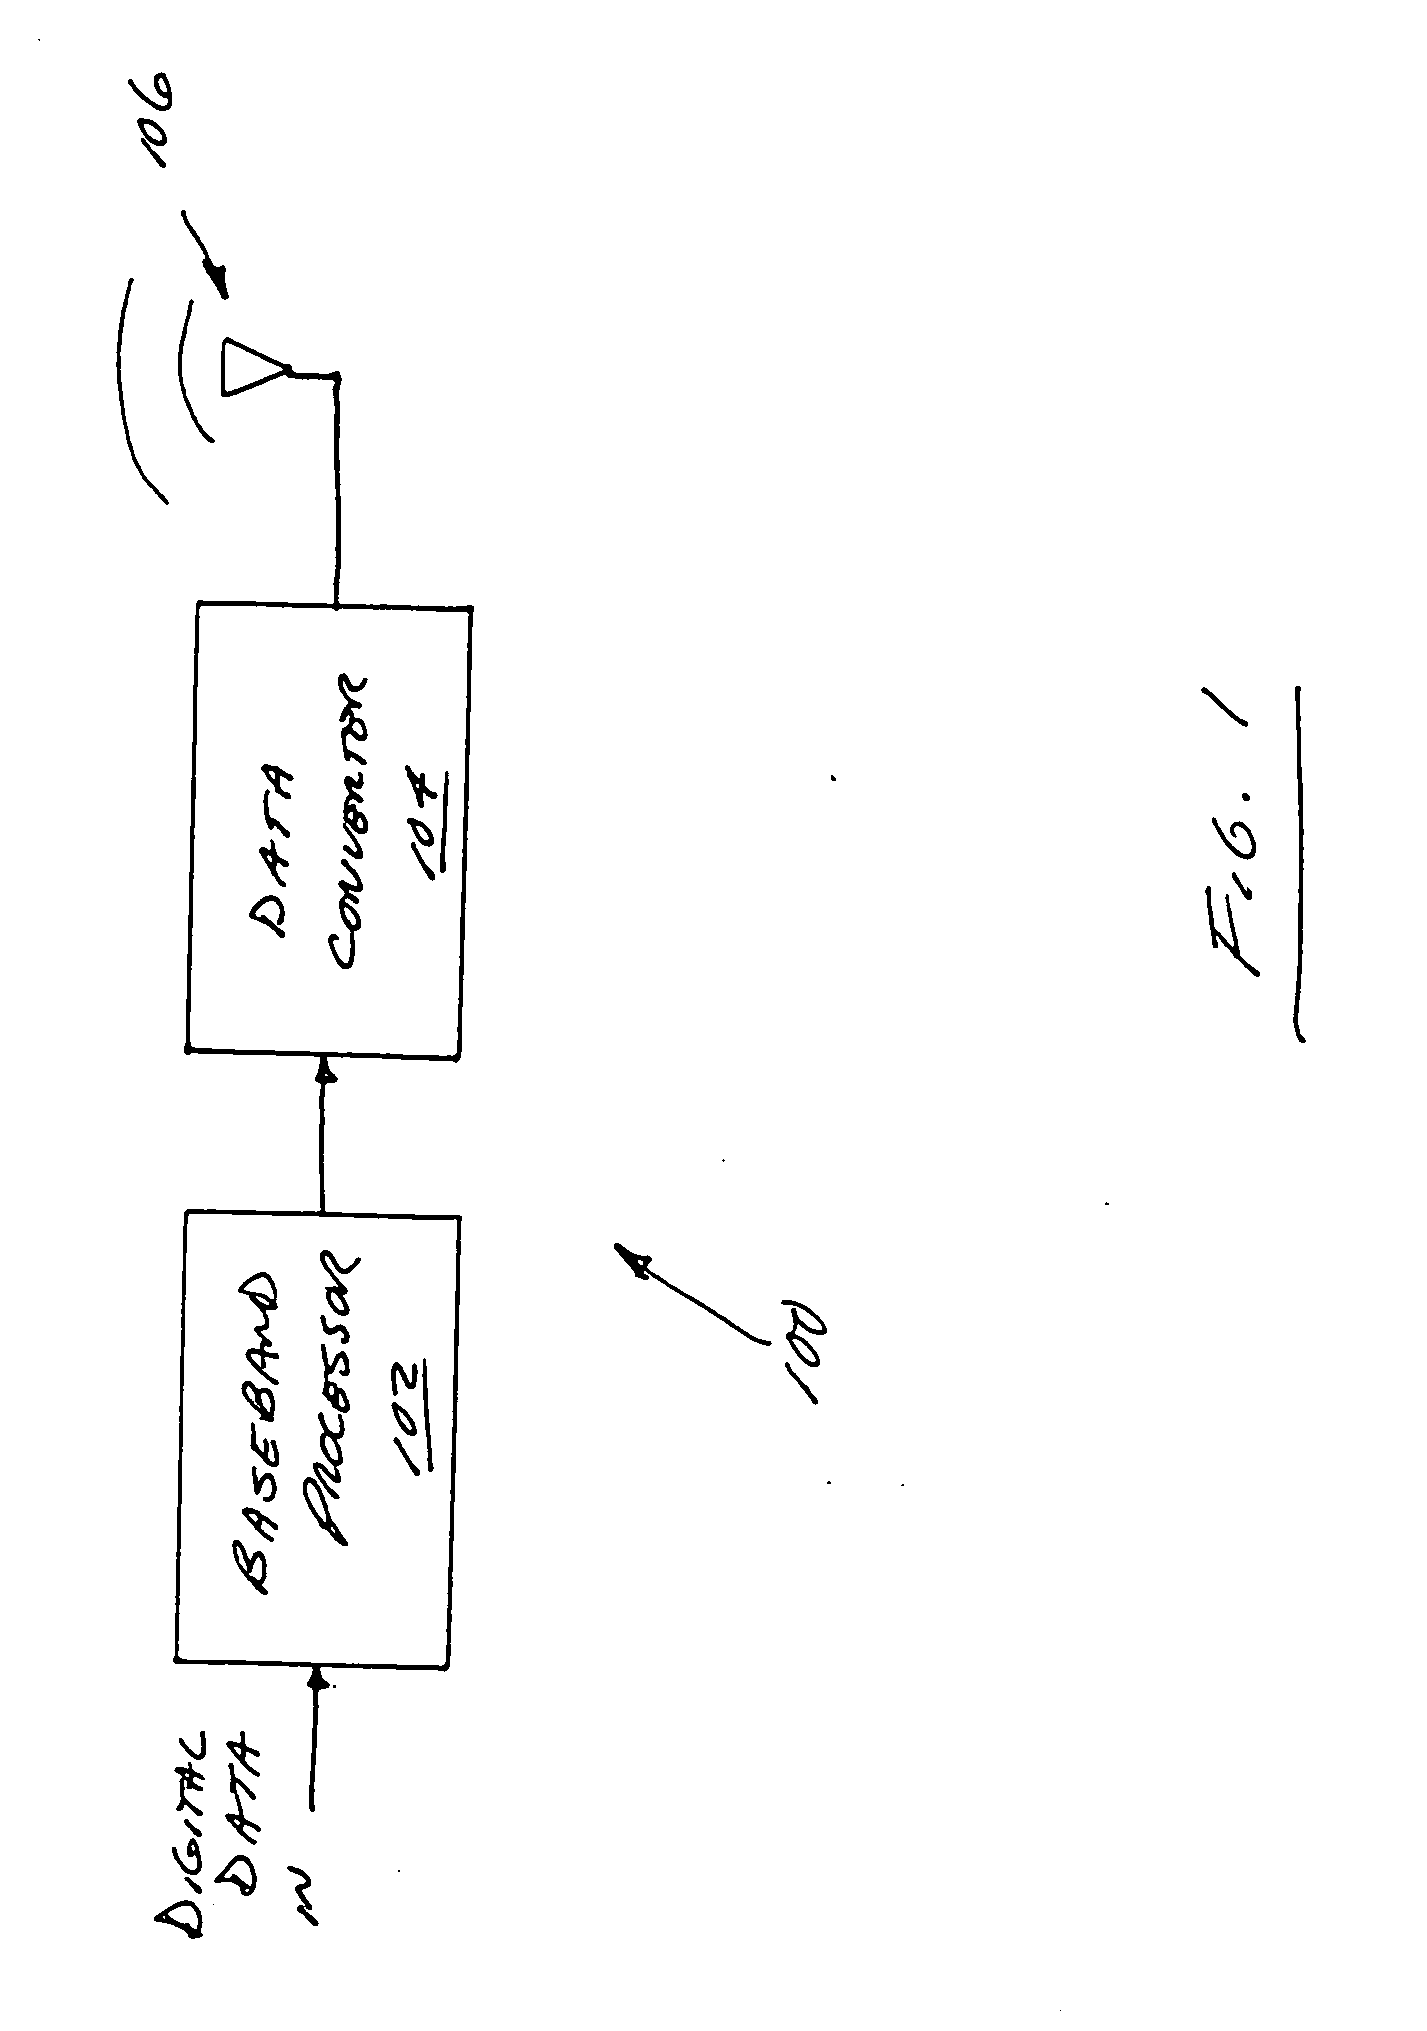 Scalable transform wideband holographic communications apparatus and methods